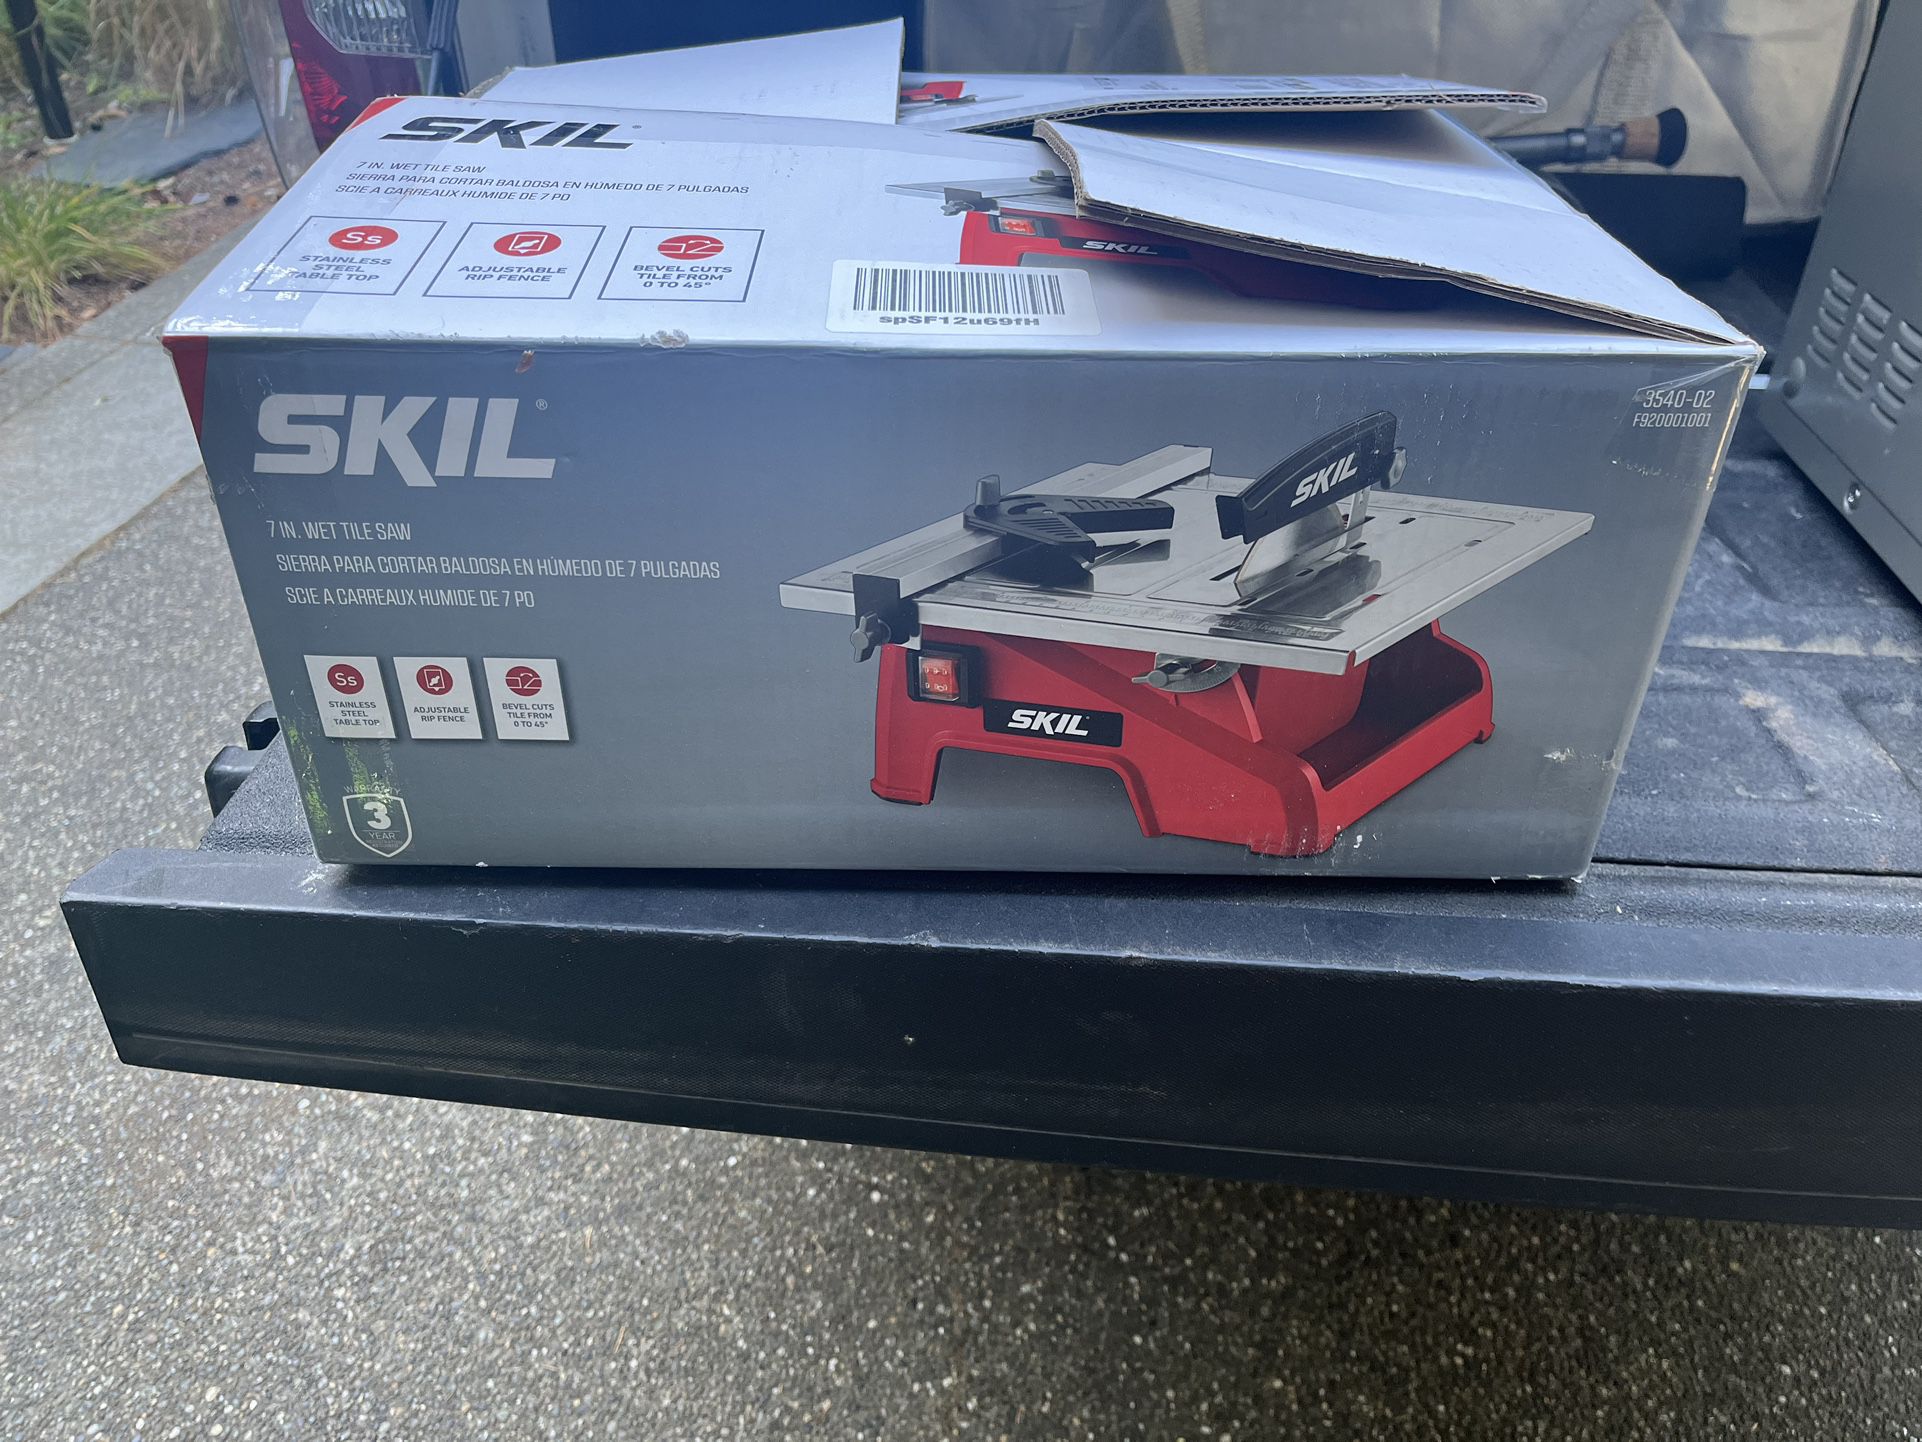 Skil Wet Tile Saw for Sale in Tumwater, WA OfferUp